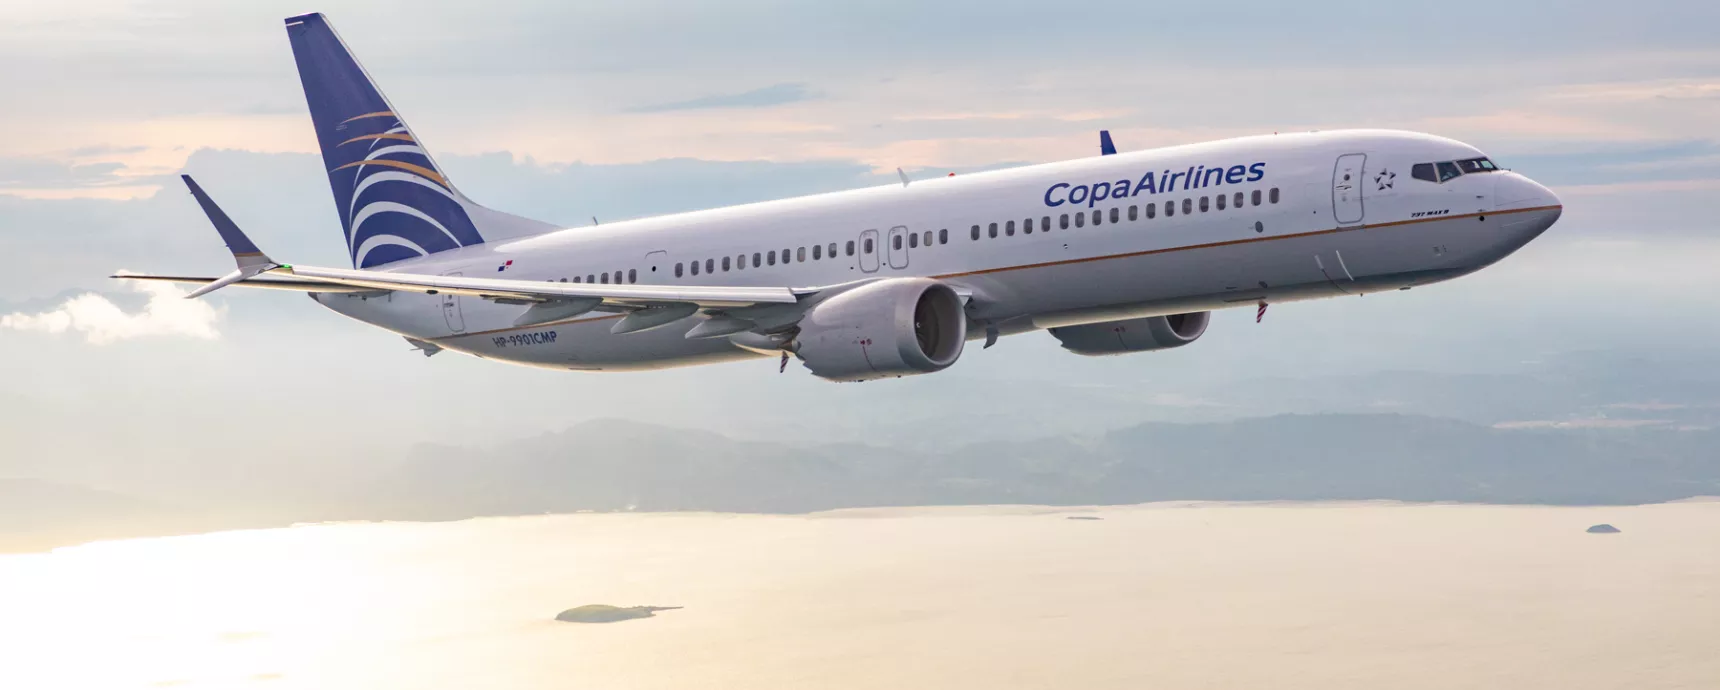 Copa Airlines arrives at Floripa Airport